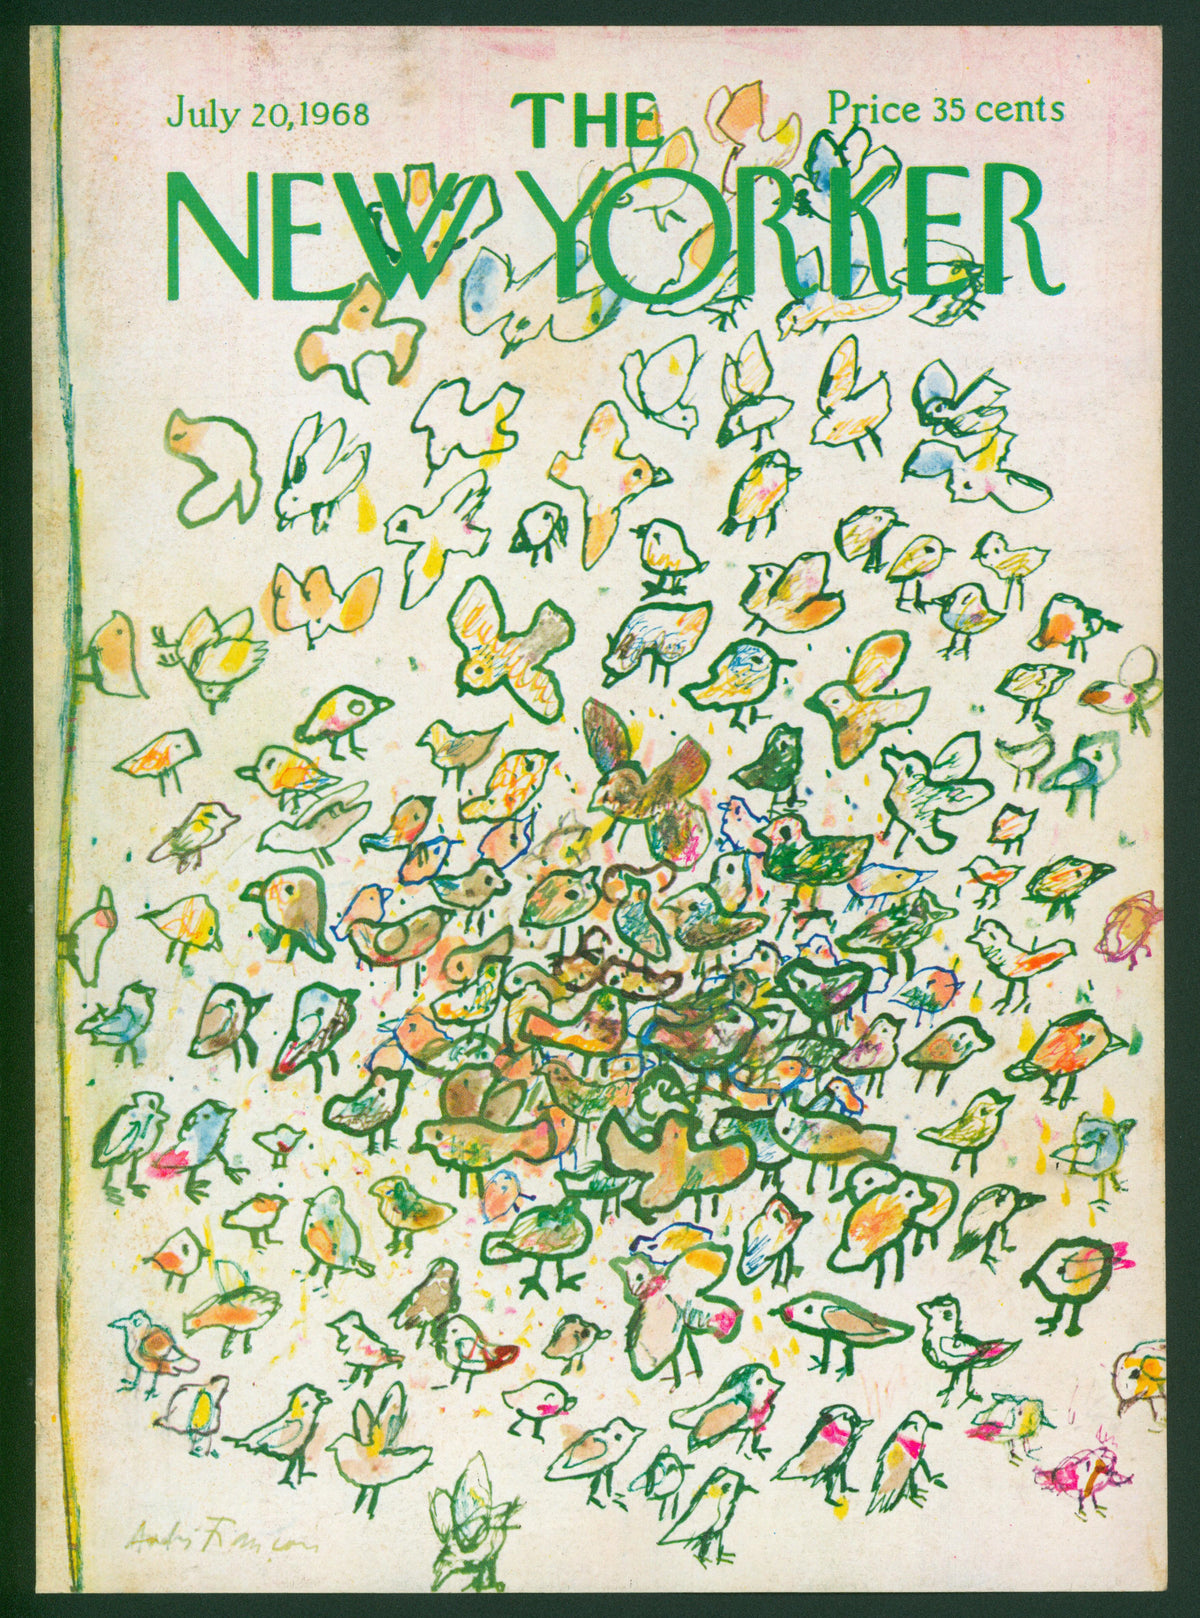 The Birds- The New Yorker - Authentic Vintage Antique Print